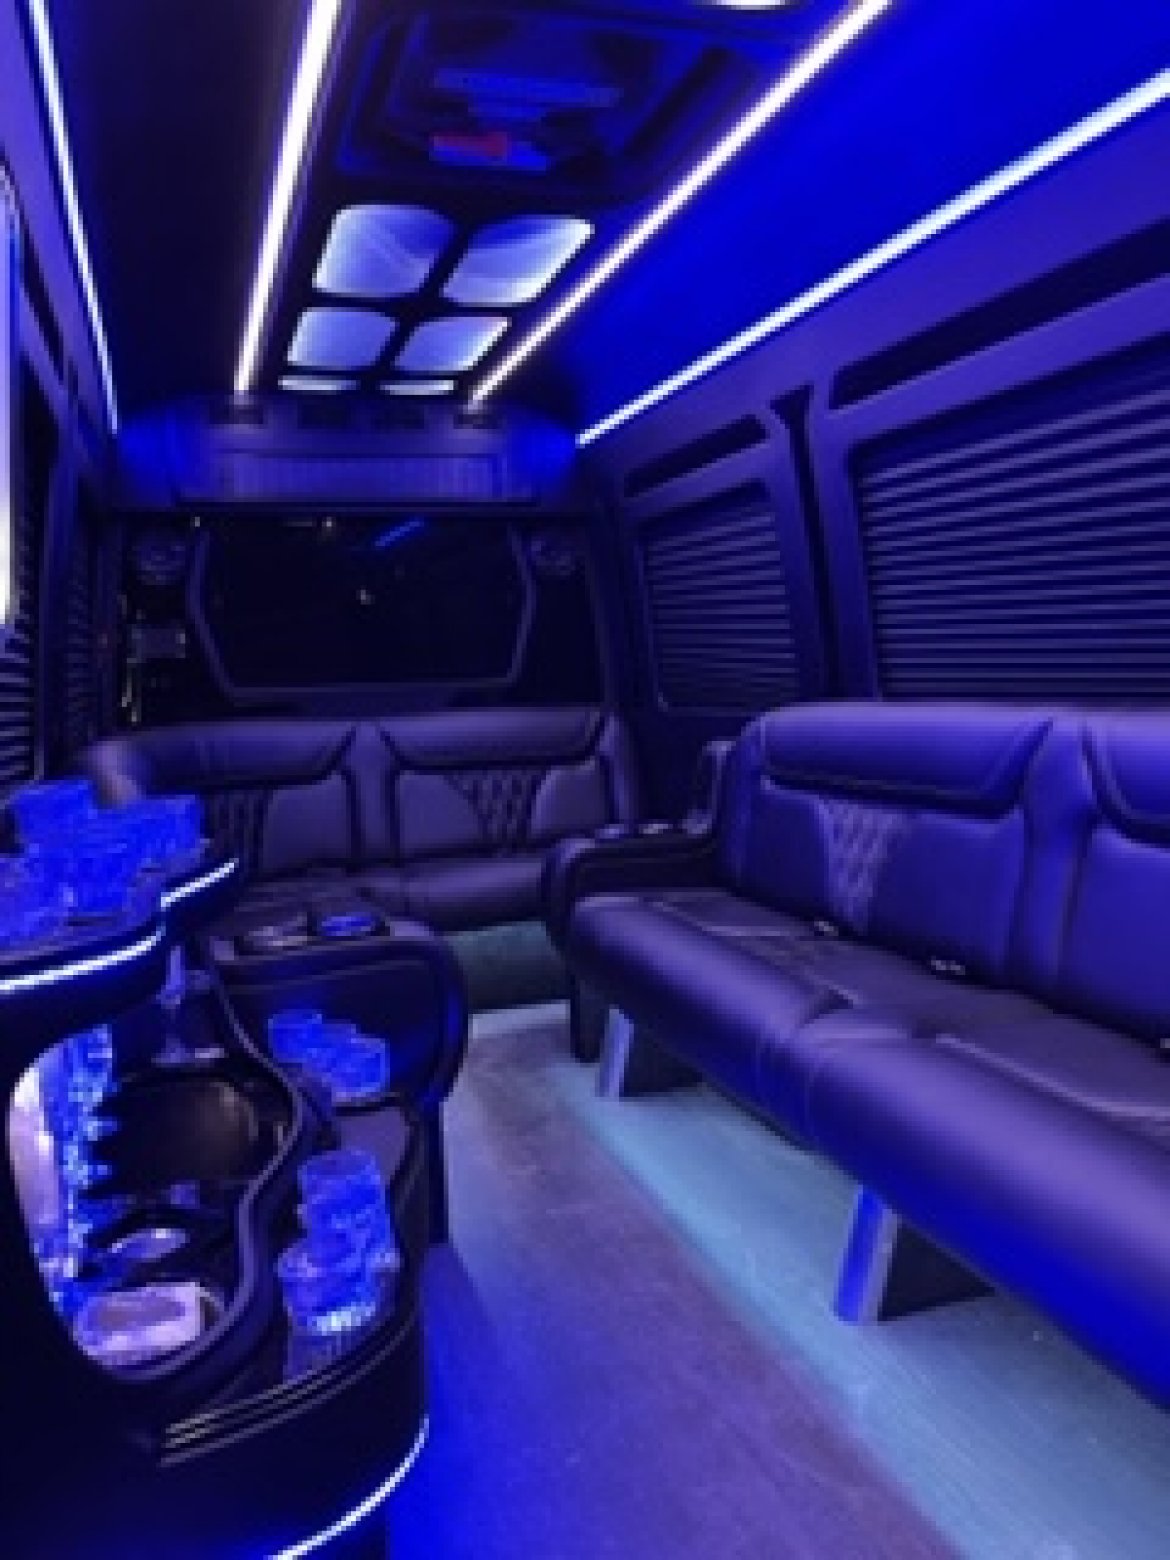 Limo Bus for sale: 2019 Ford Limousine  PartyBus by Builders Grech